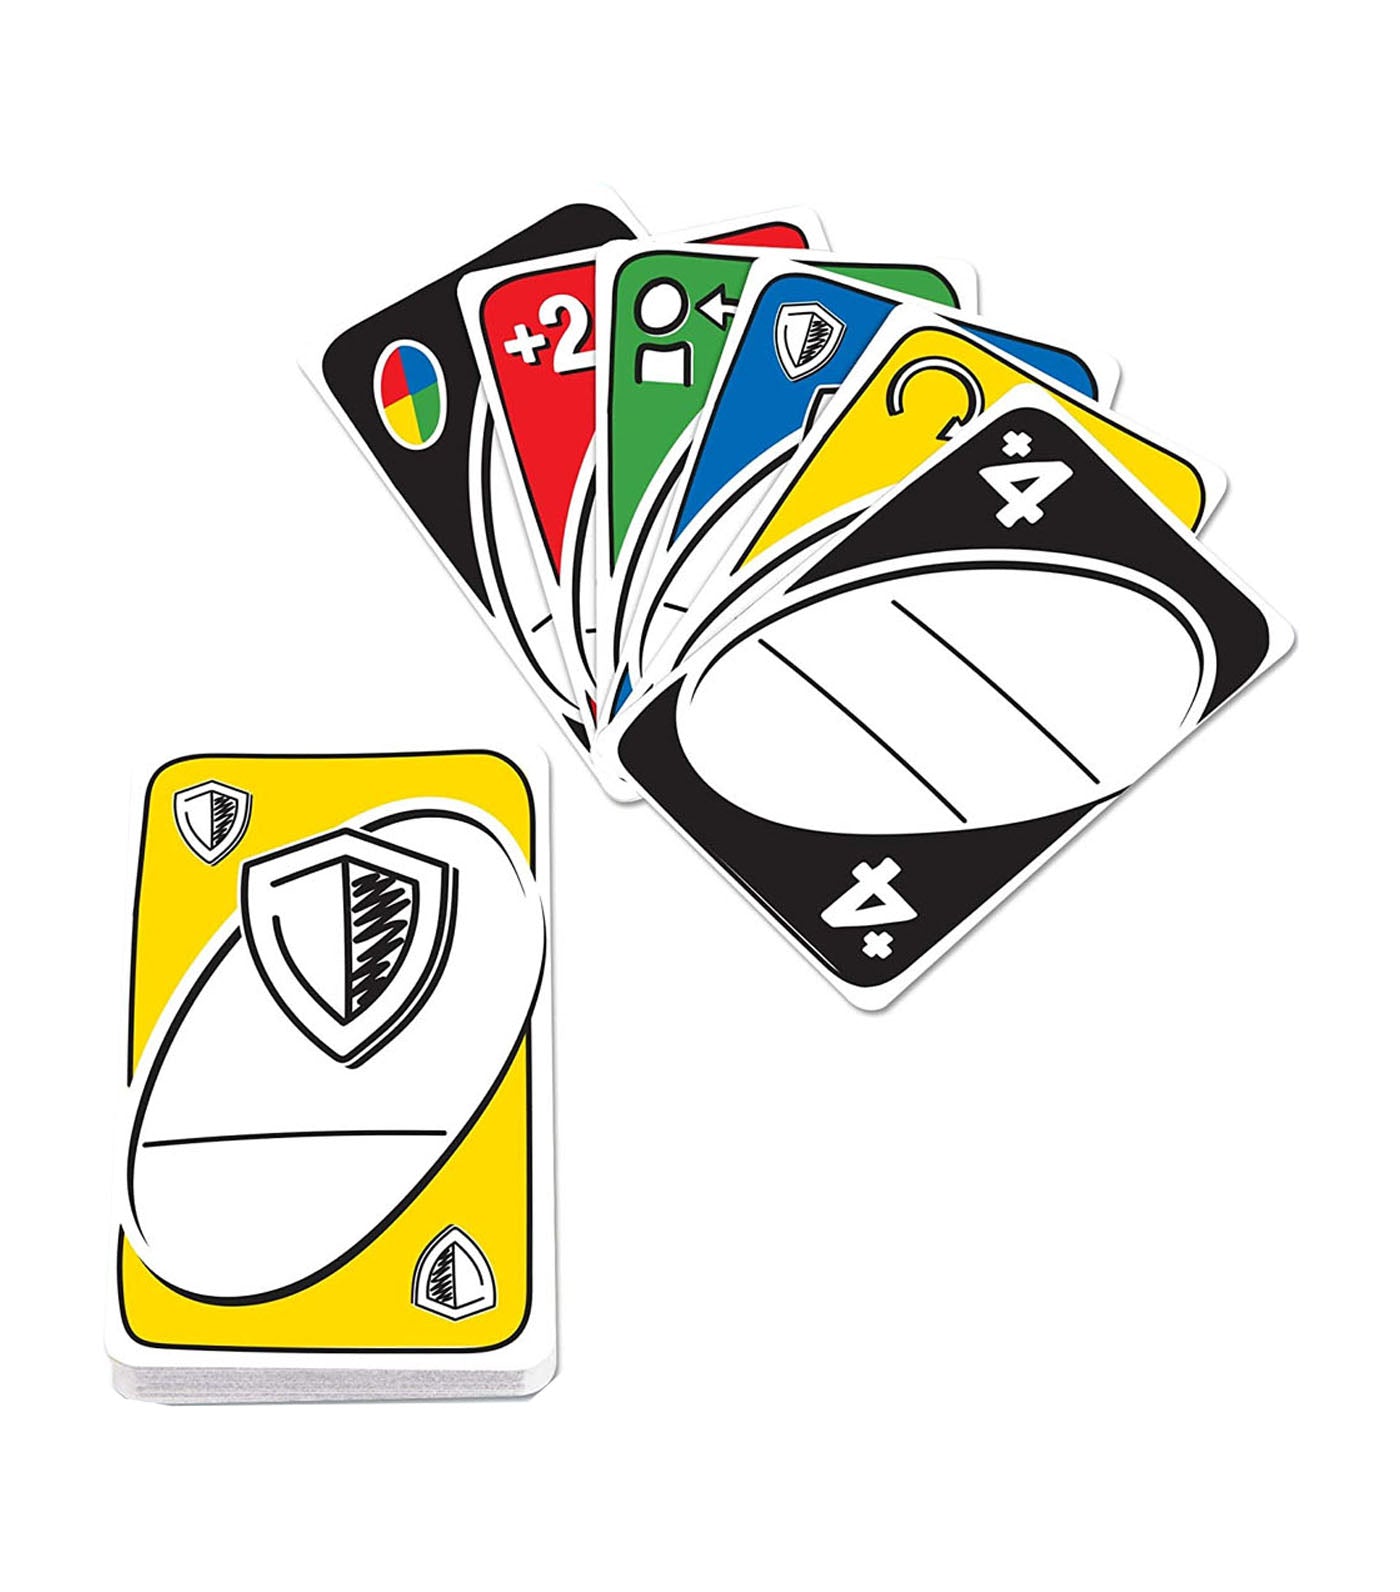 UNO Dos Second Edition [Card Game] [112 Cards for 2-4 Players]